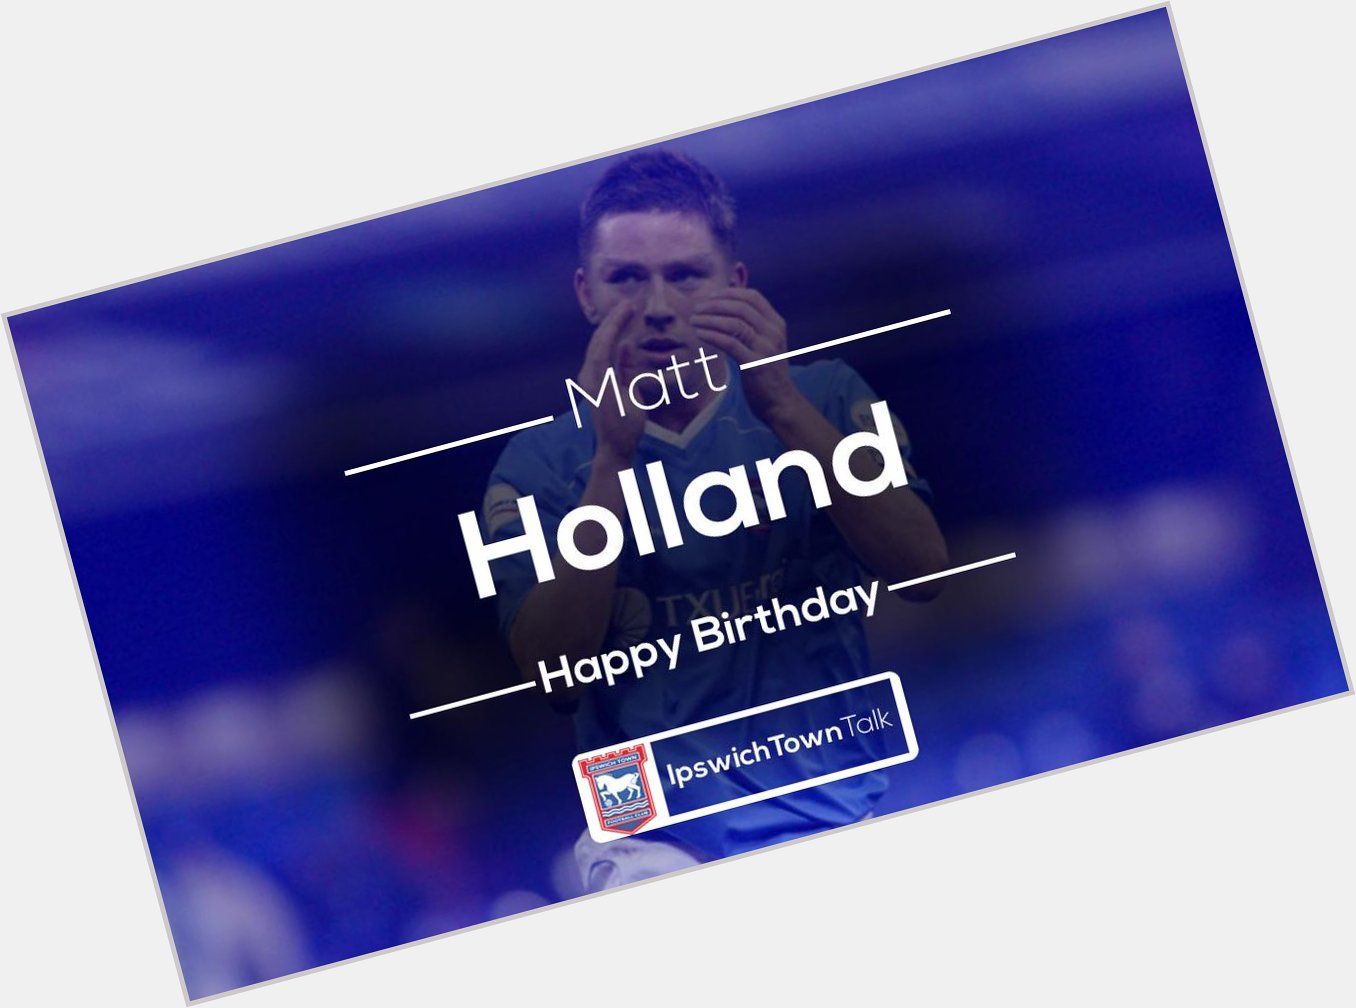 Morning all! We start today by wishing Town legend Matt Holland a very happy 41st birthday! 